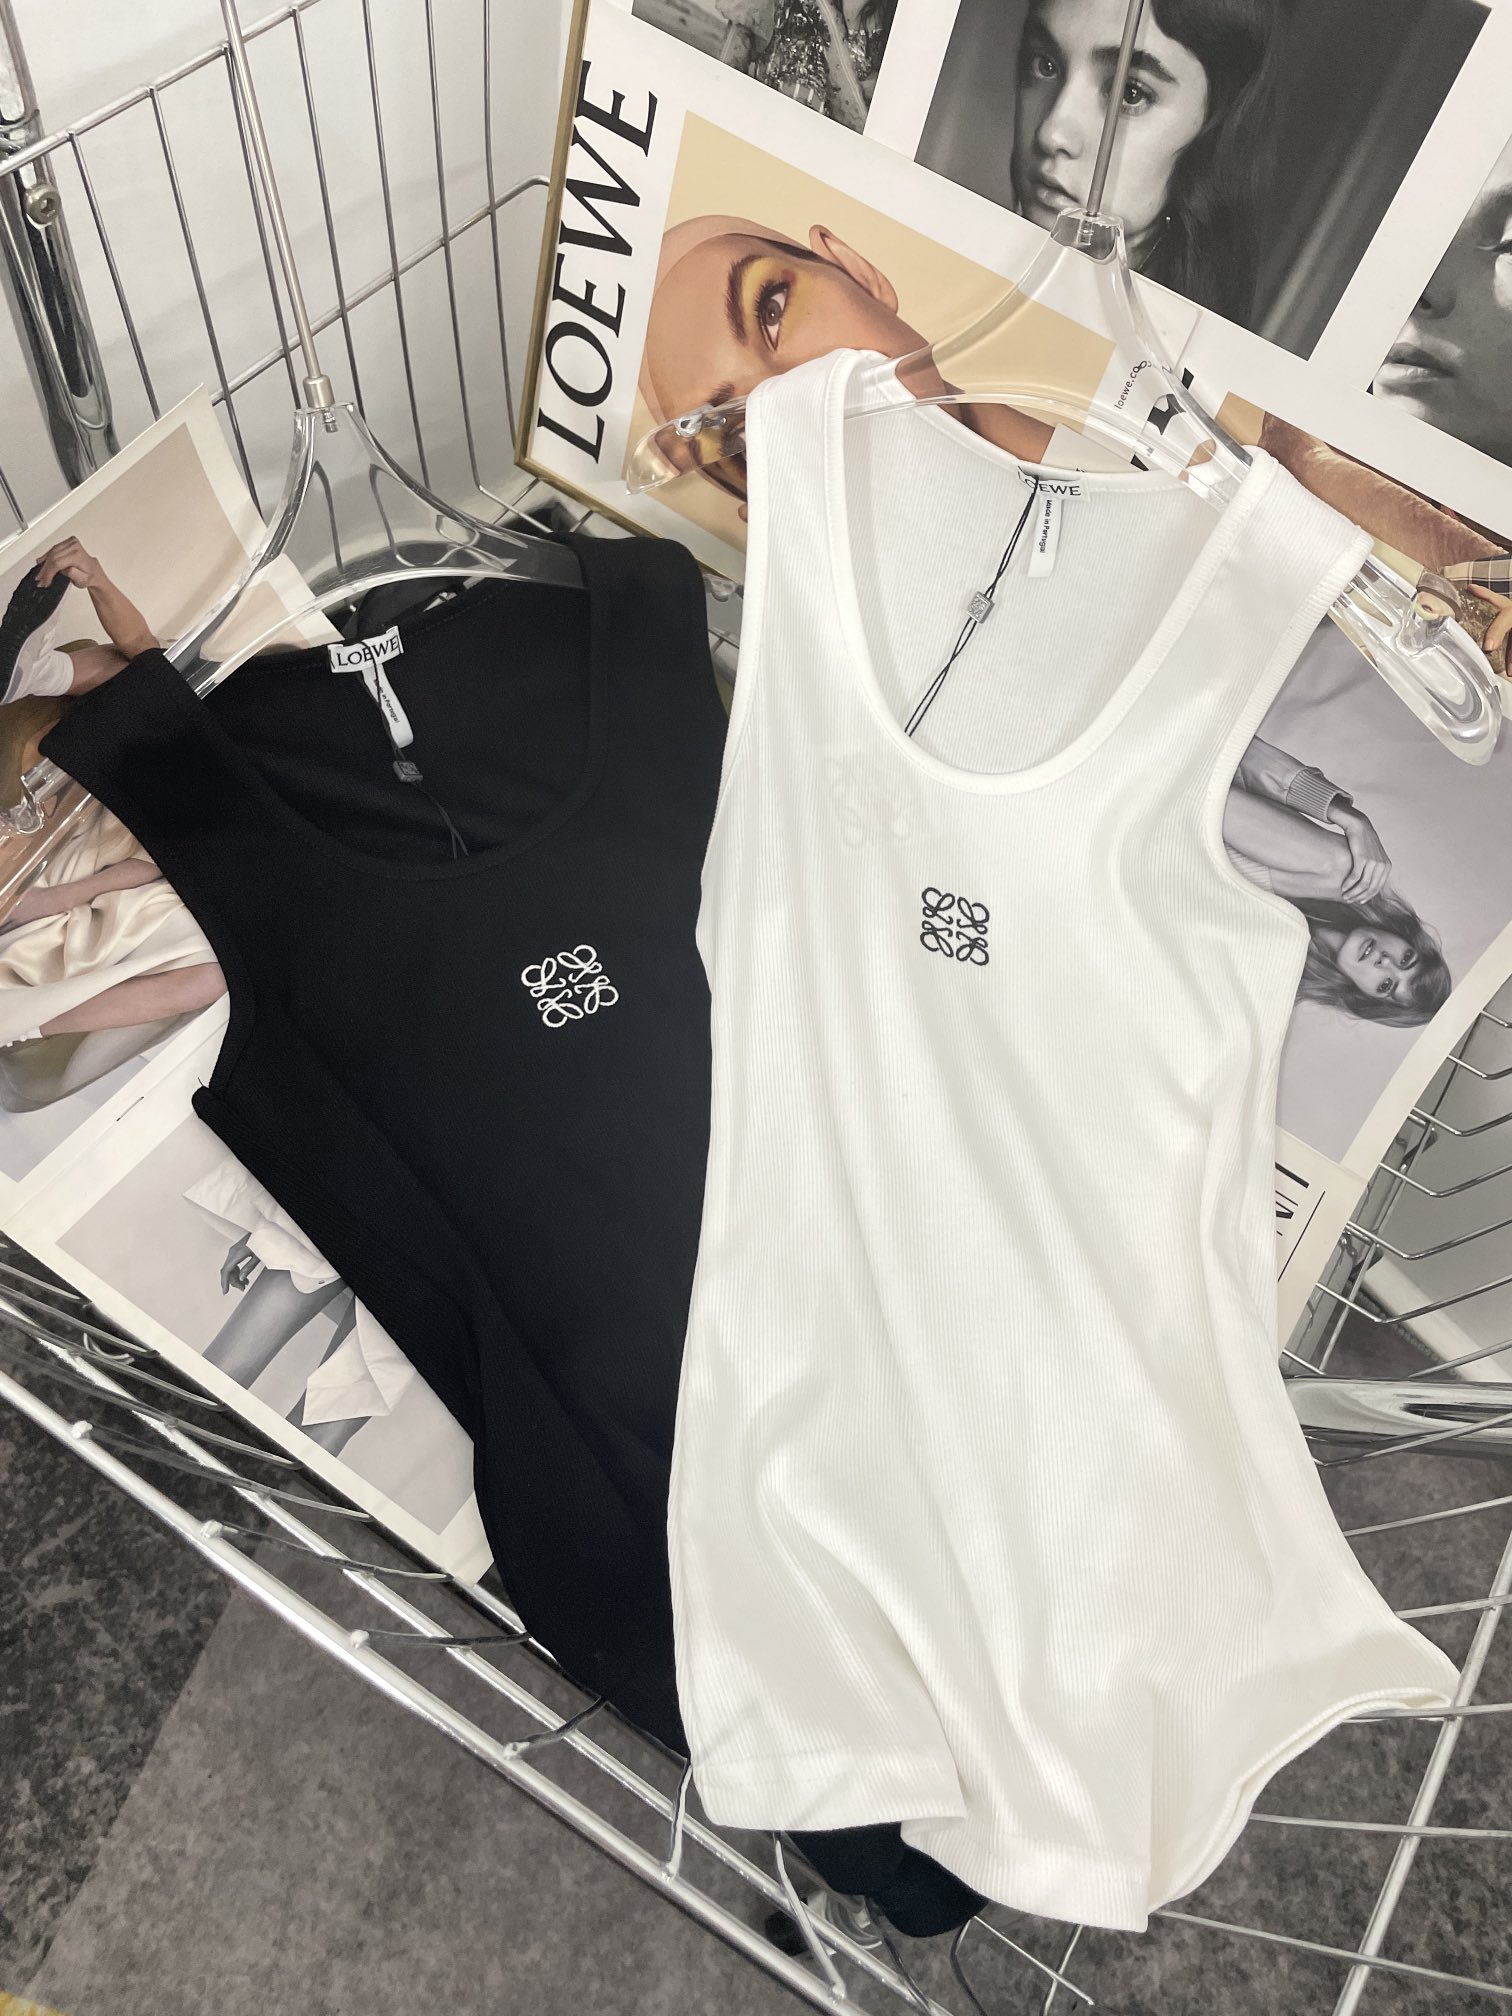 Loewe Clothing Tank Tops&Camis Black White Embroidery Women Cotton Knitting Summer Collection